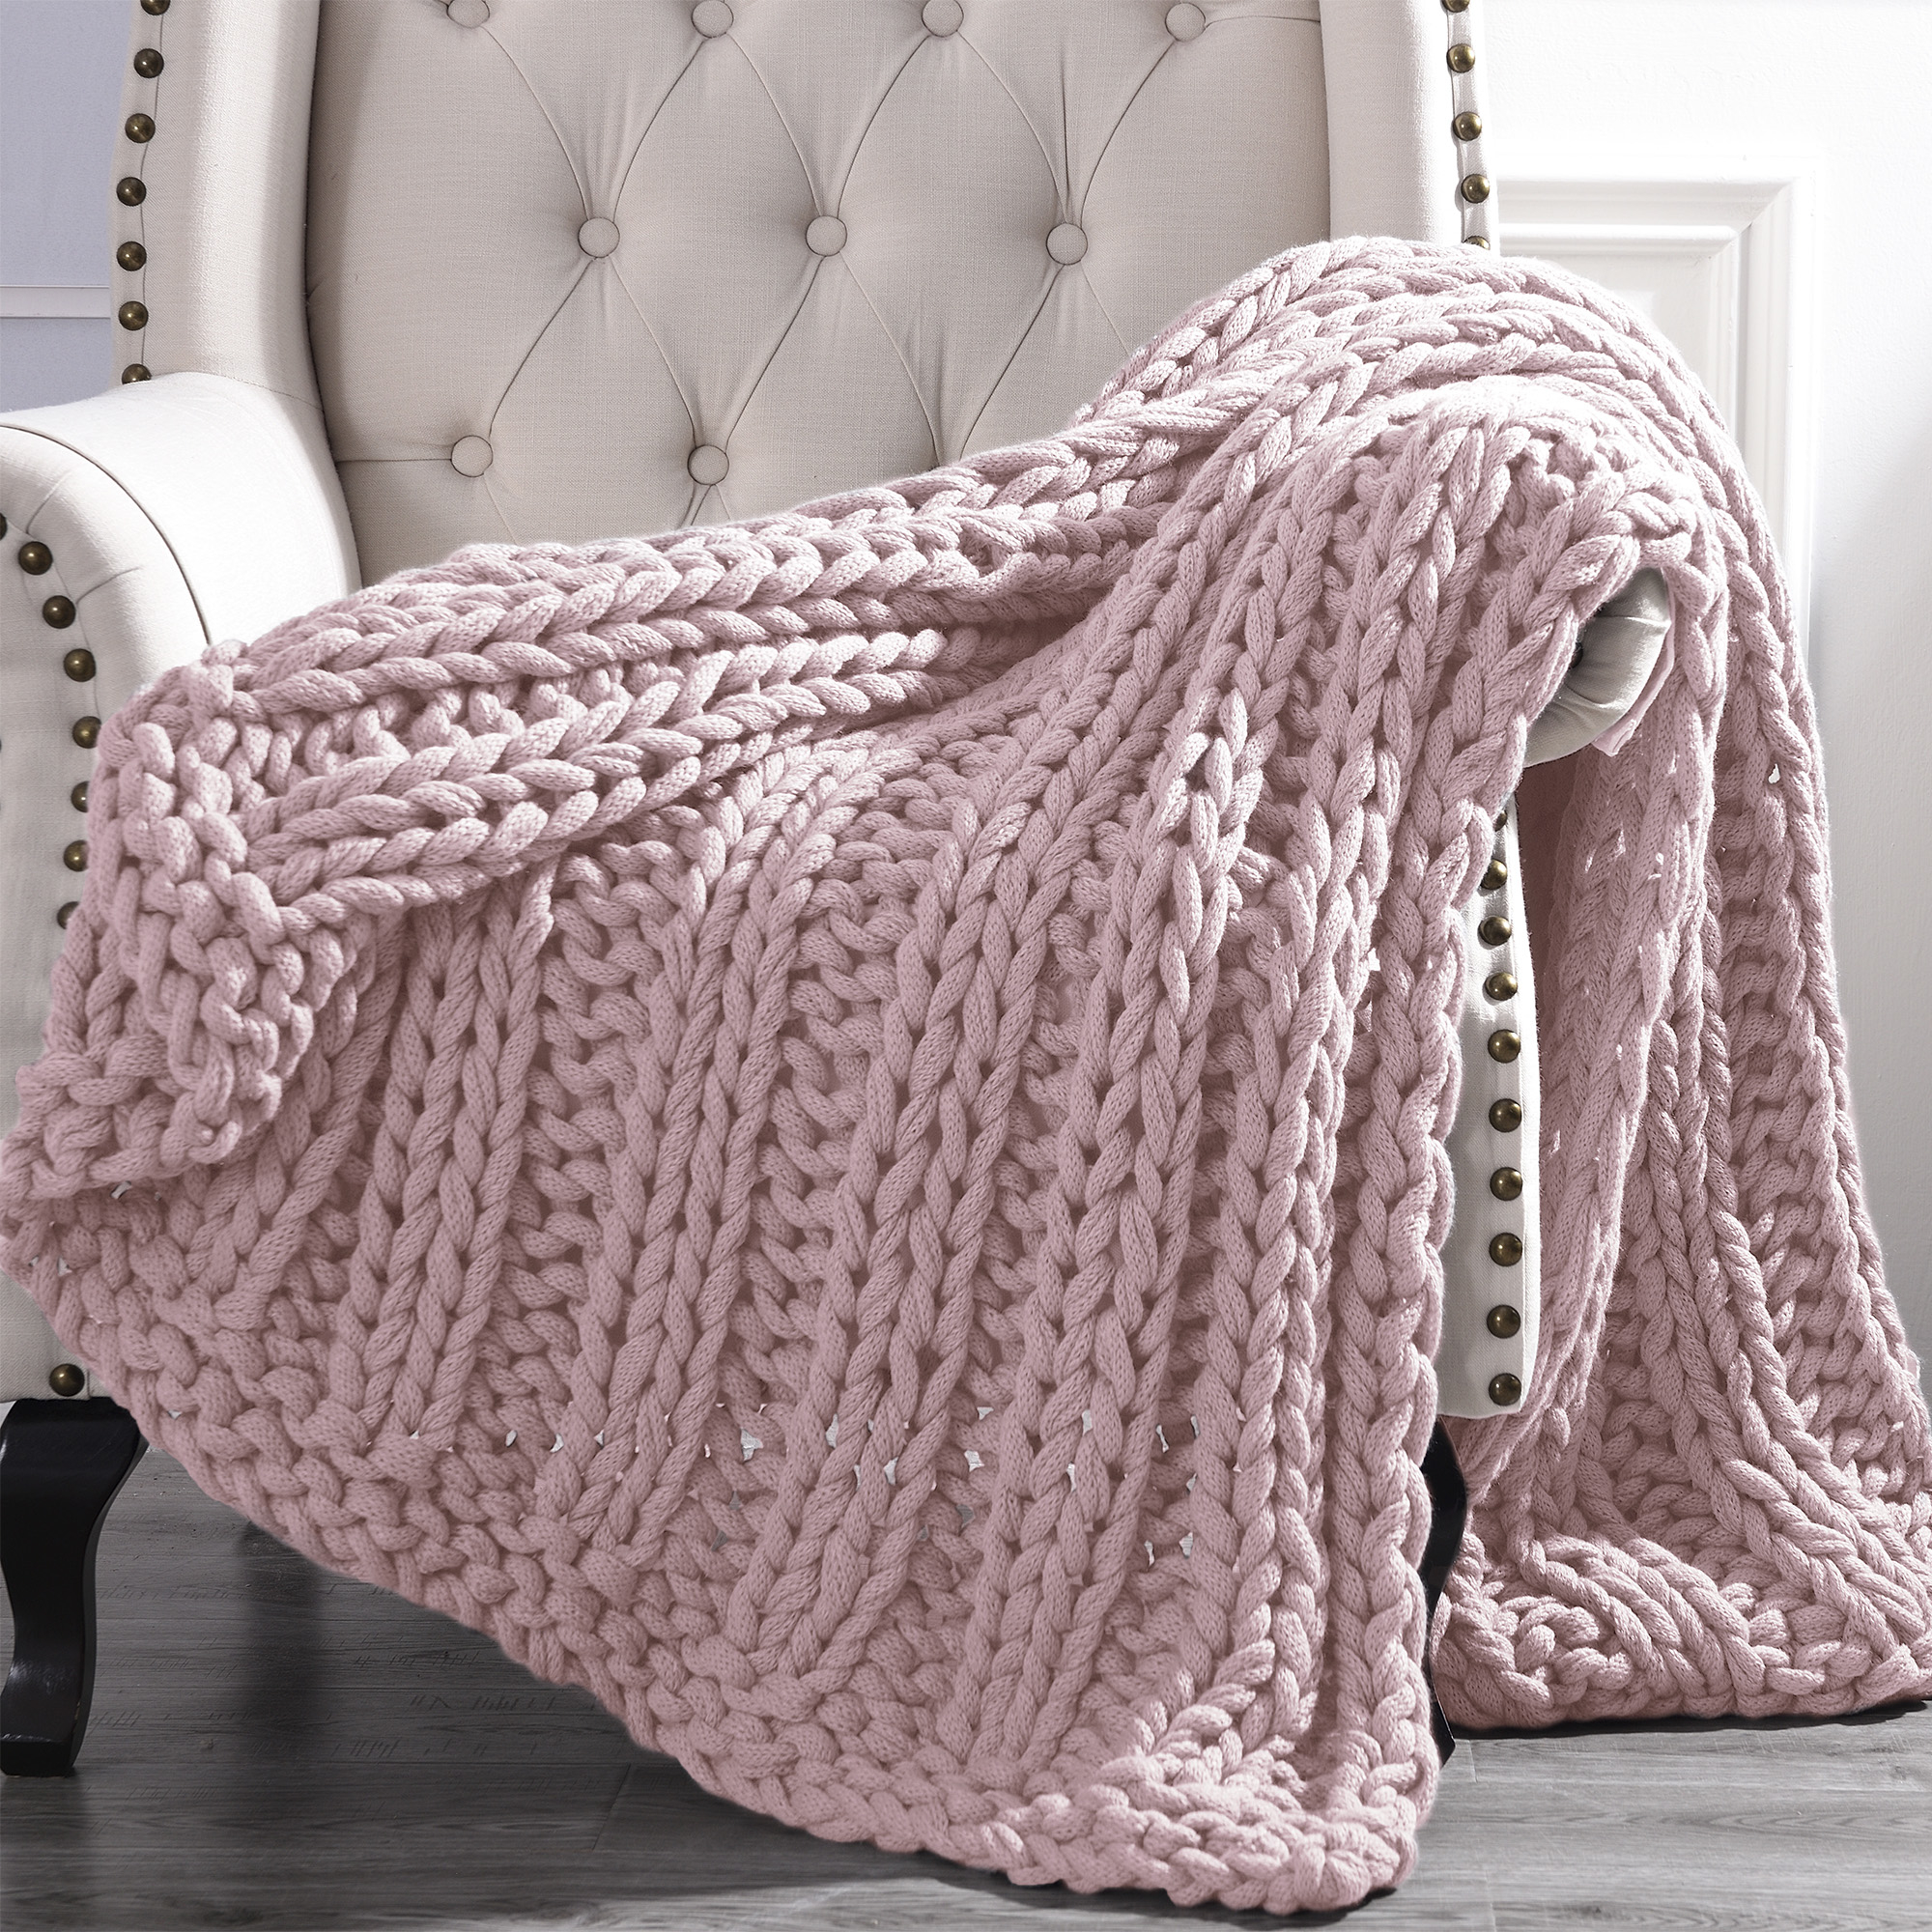 A chunky knit blanket